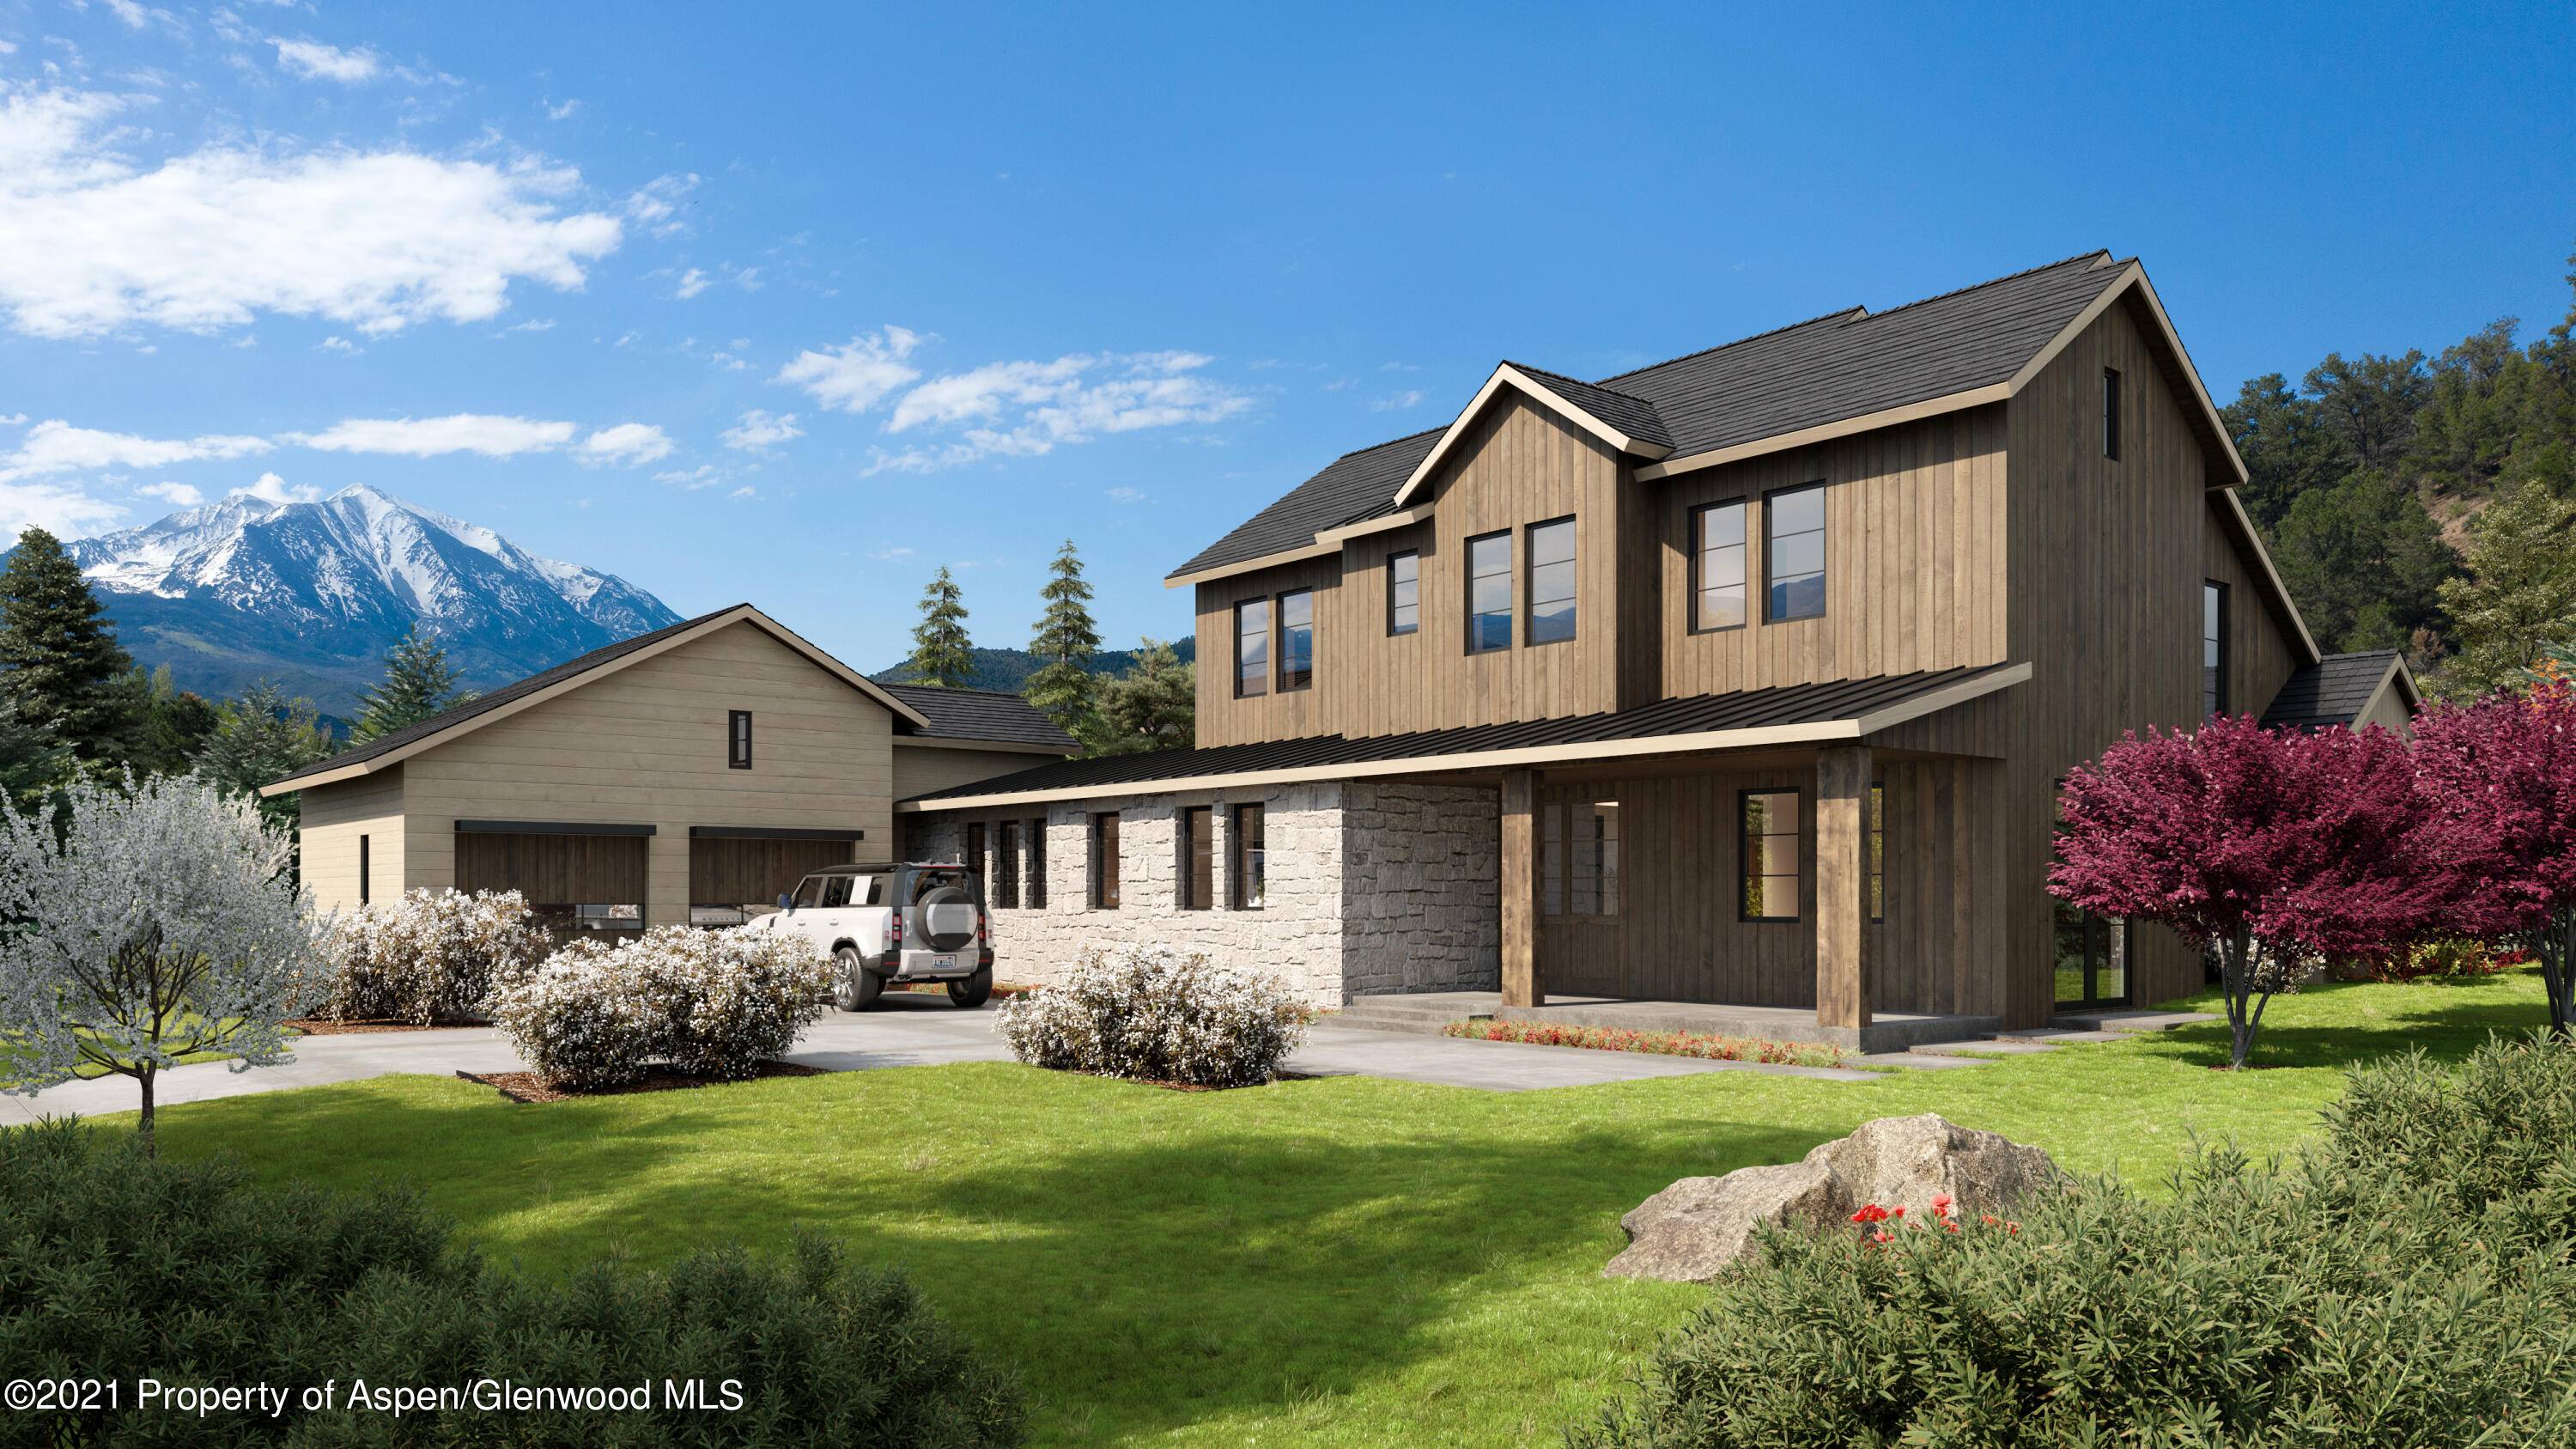 Situated in scenic Carbondale minutes from the heart of Aspen, this brand new, high end modern home by Peak3 is set to be completed in June 2023.